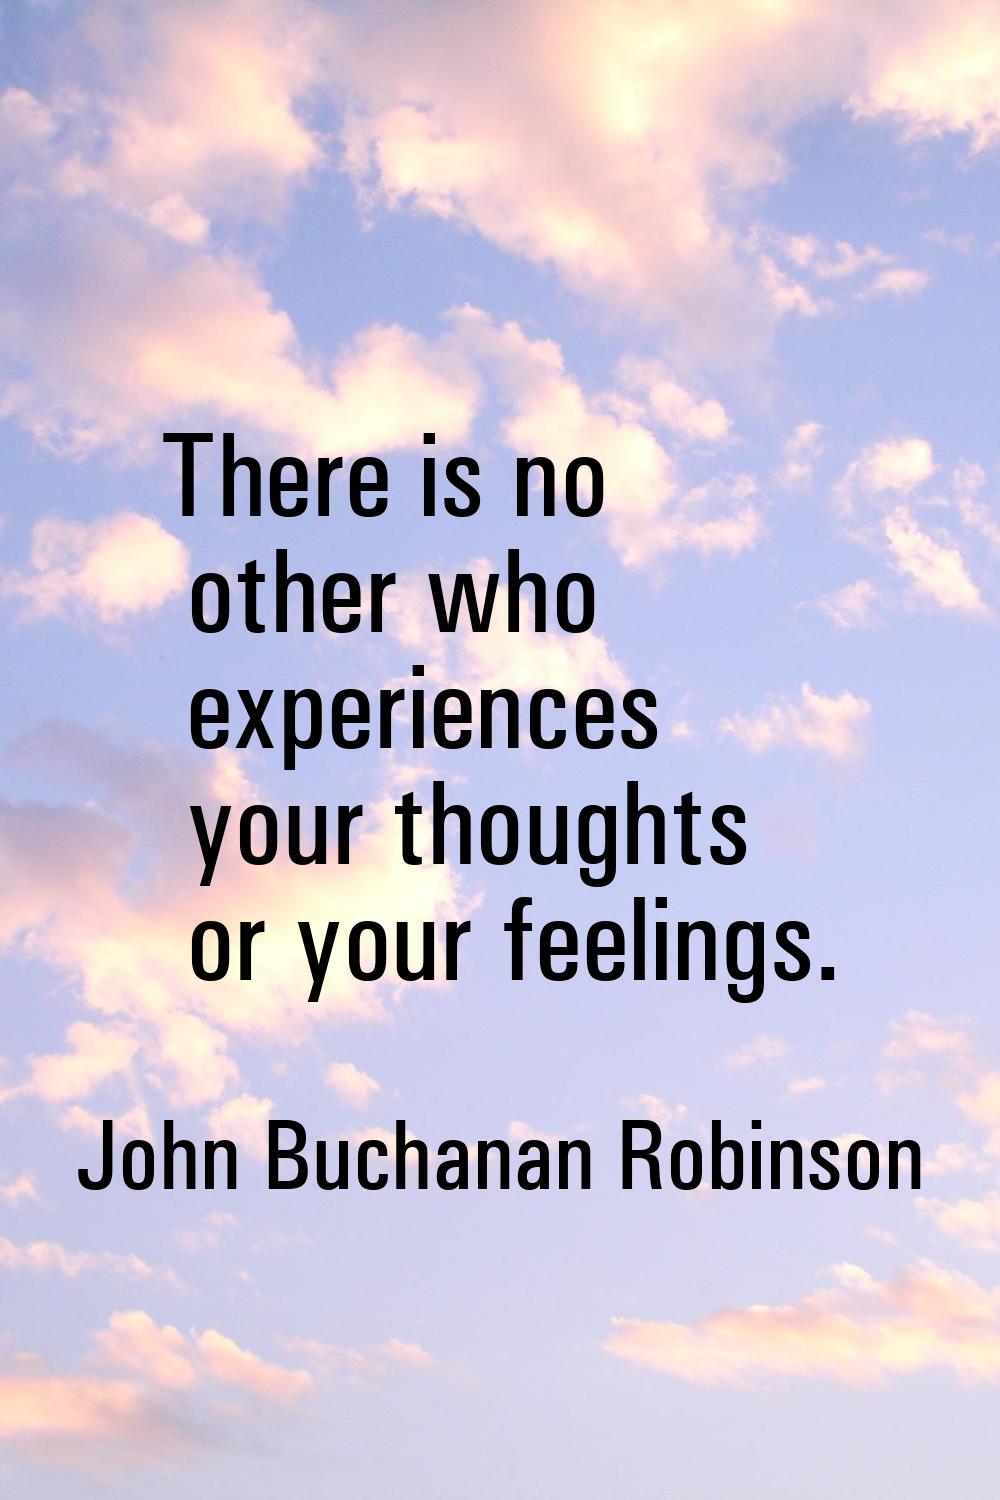 There is no other who experiences your thoughts or your feelings.